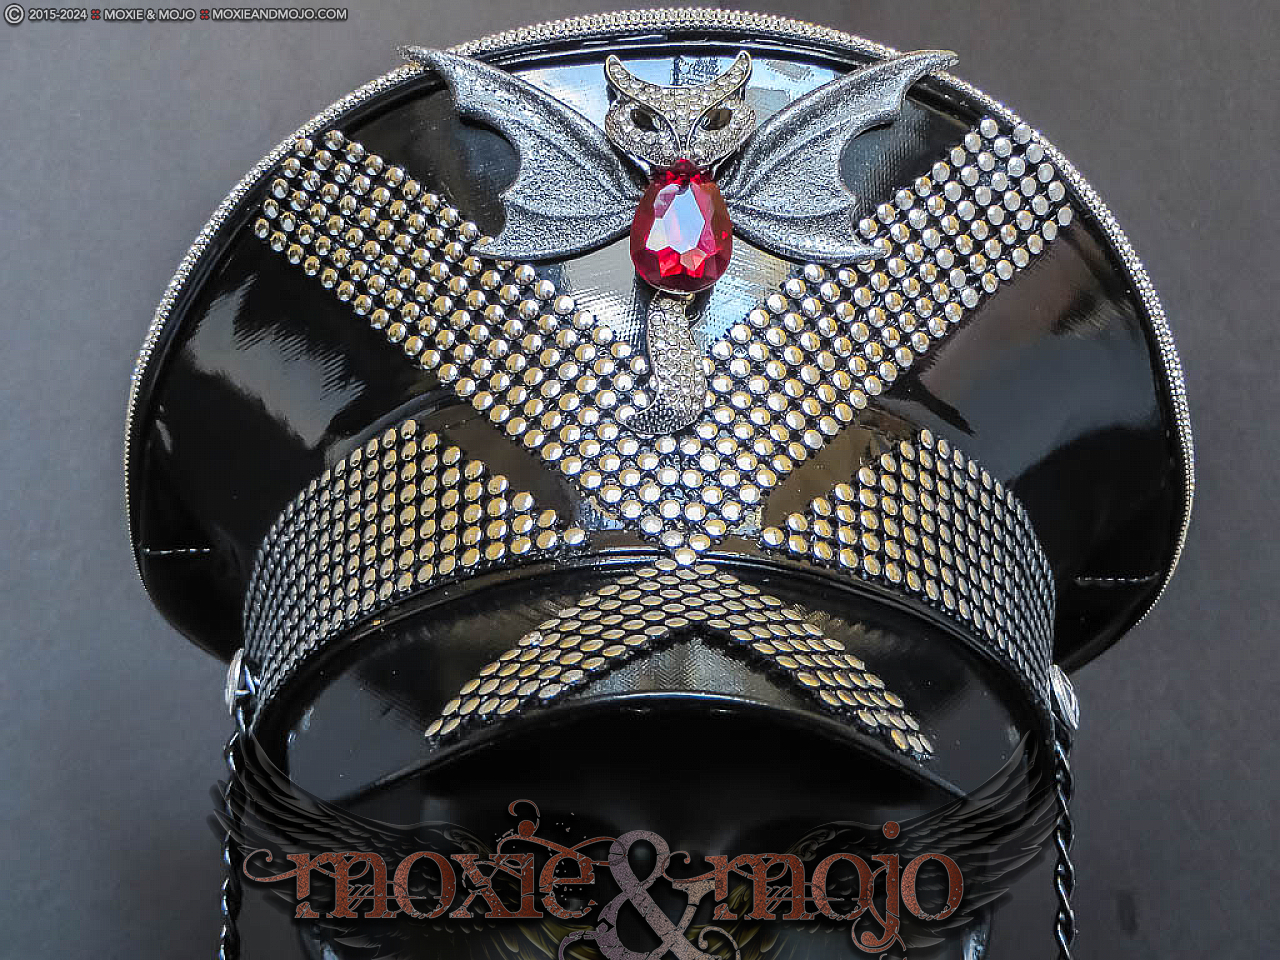 Moxie & Mojo :: Captains Hats, Band Hats, and More Hats :: Goldie Lux